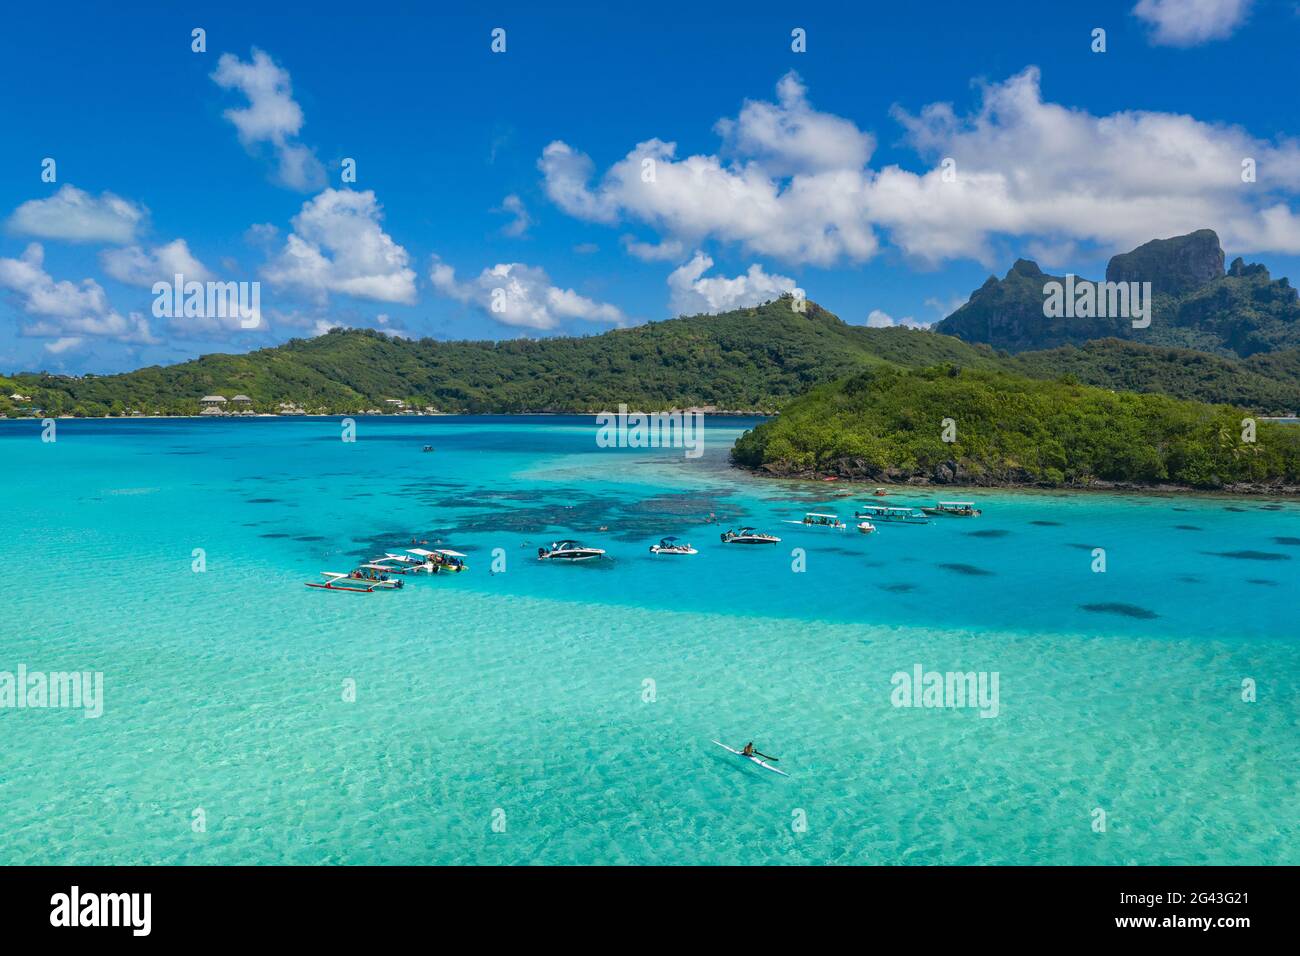 Aerial view of outrigger canoes and excursion boats in the Bora Bora Lagoon, Bora Bora, Leeward Islands, French Polynesia, South Pacific Stock Photo